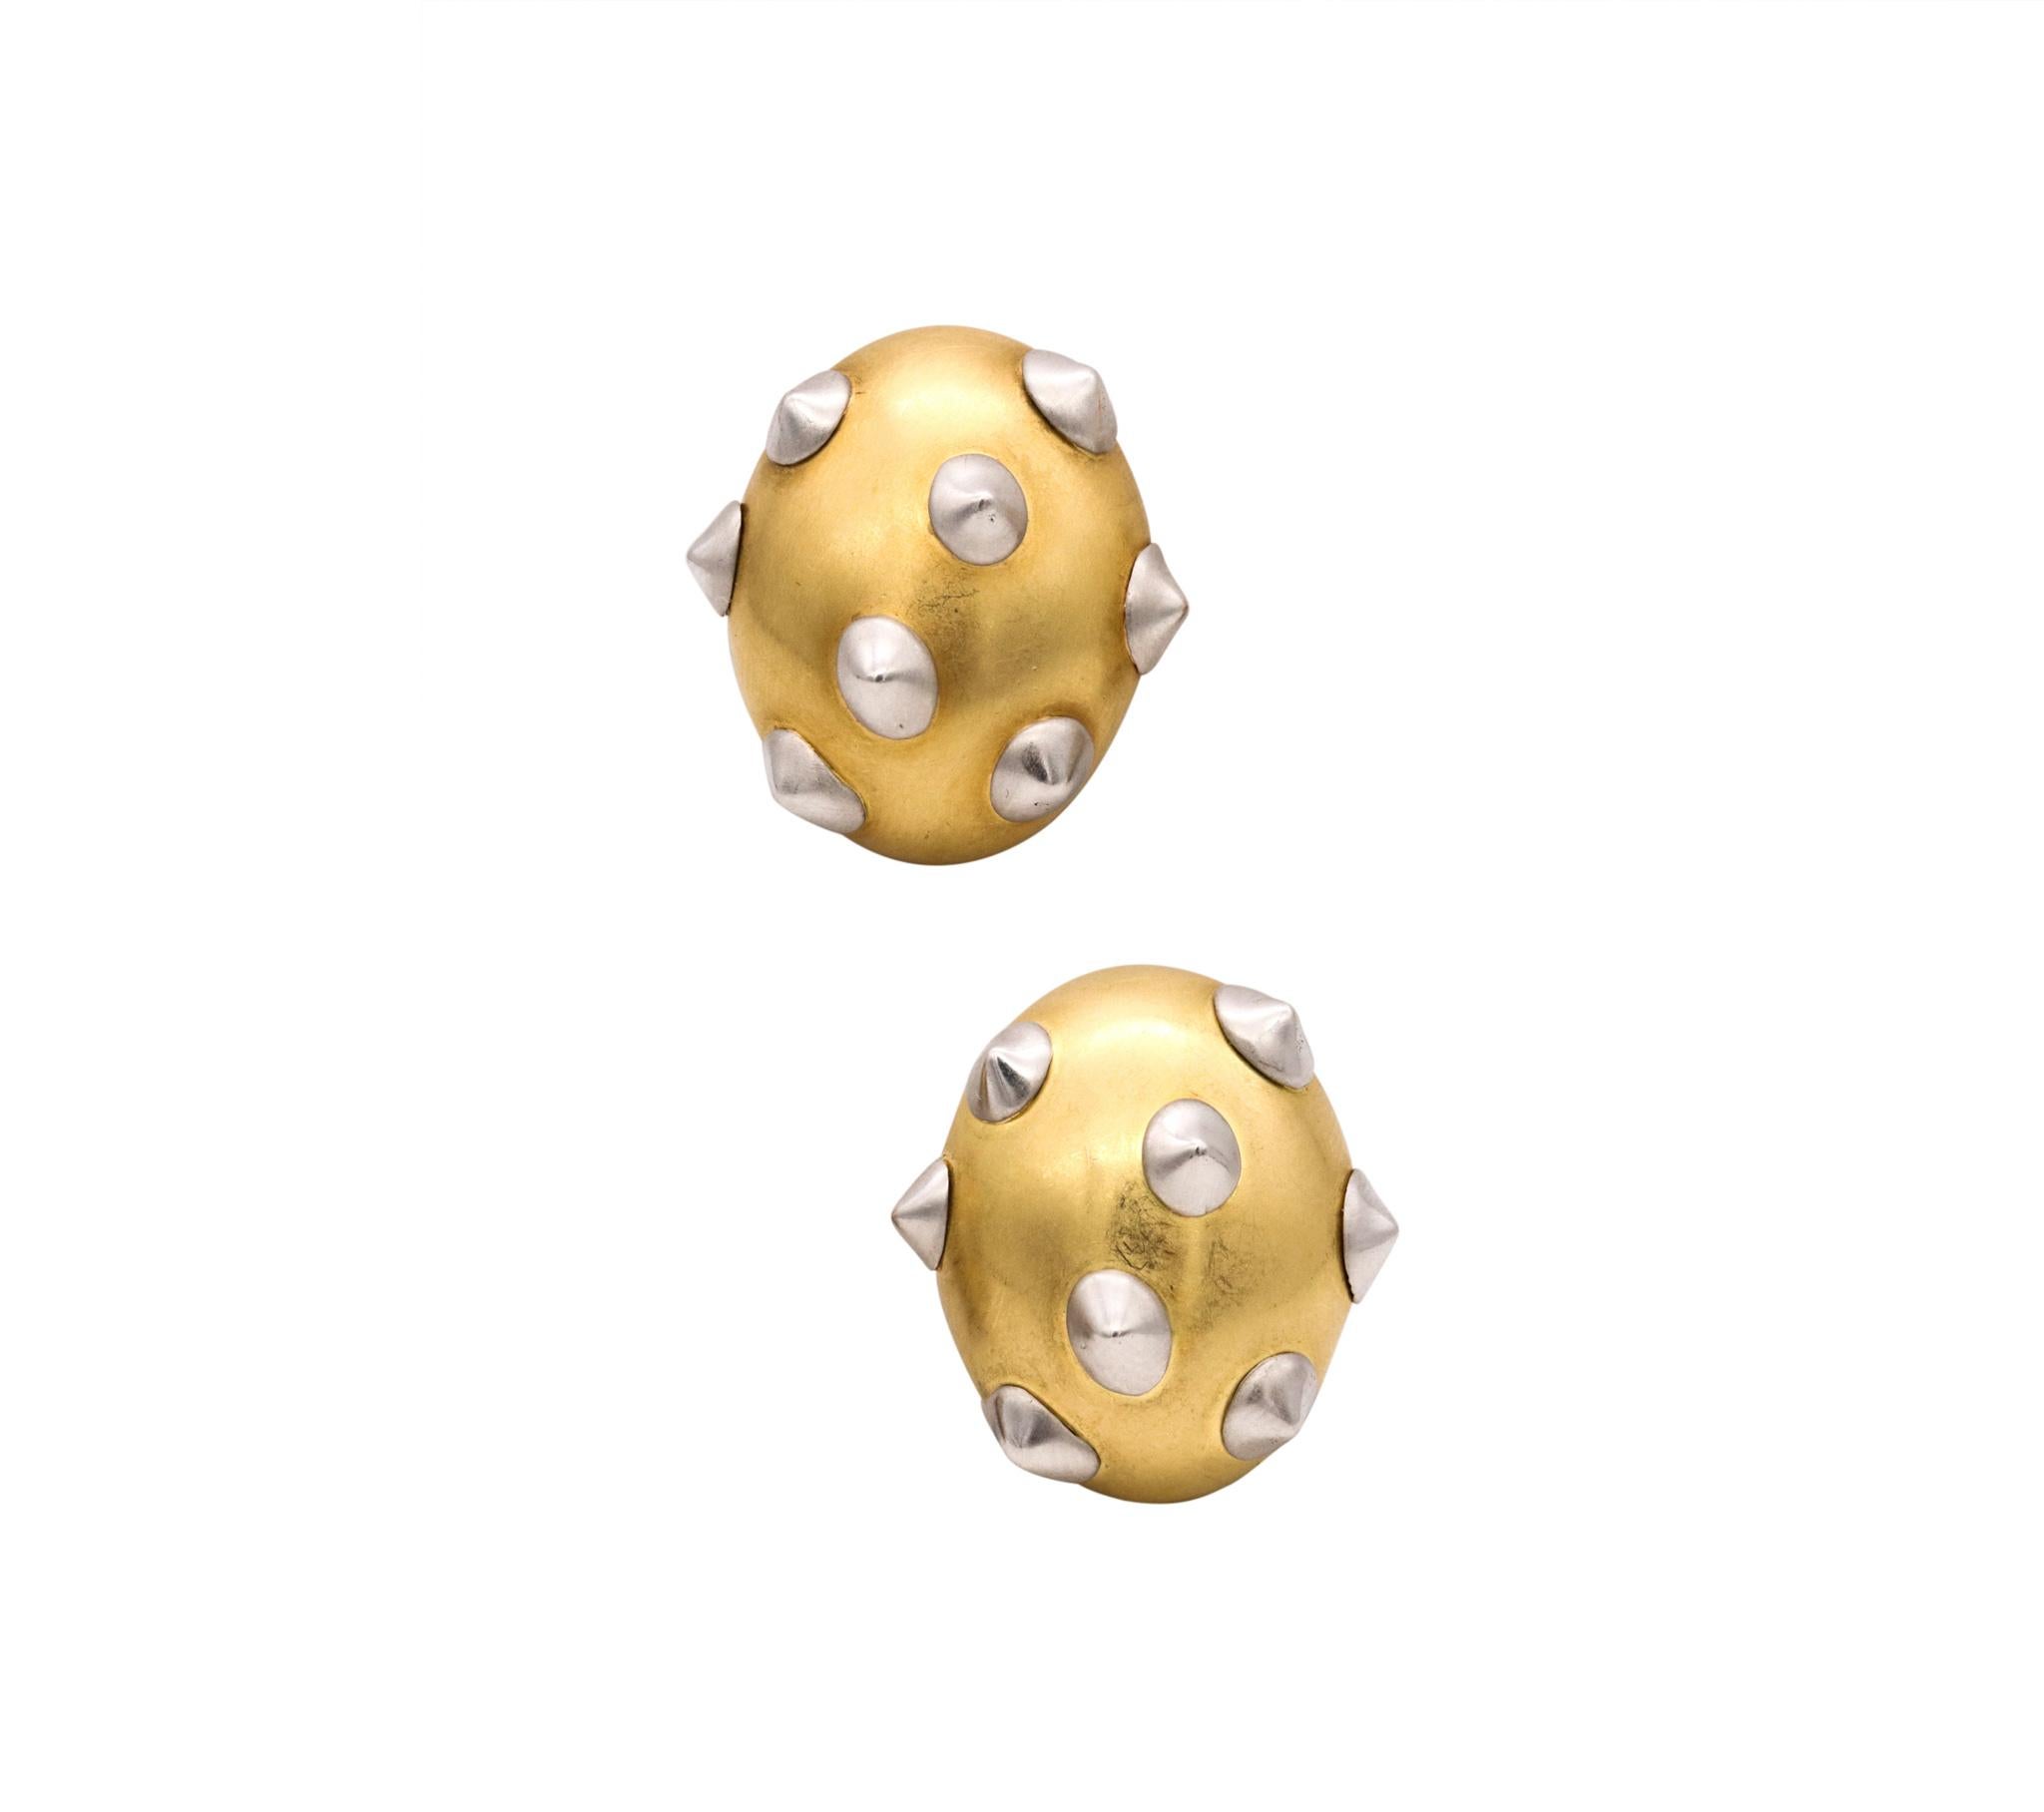 Modernist Angela Cummings 1984 New York Oval Spikes Earrings 18Kt Yellow Gold and Platinum For Sale